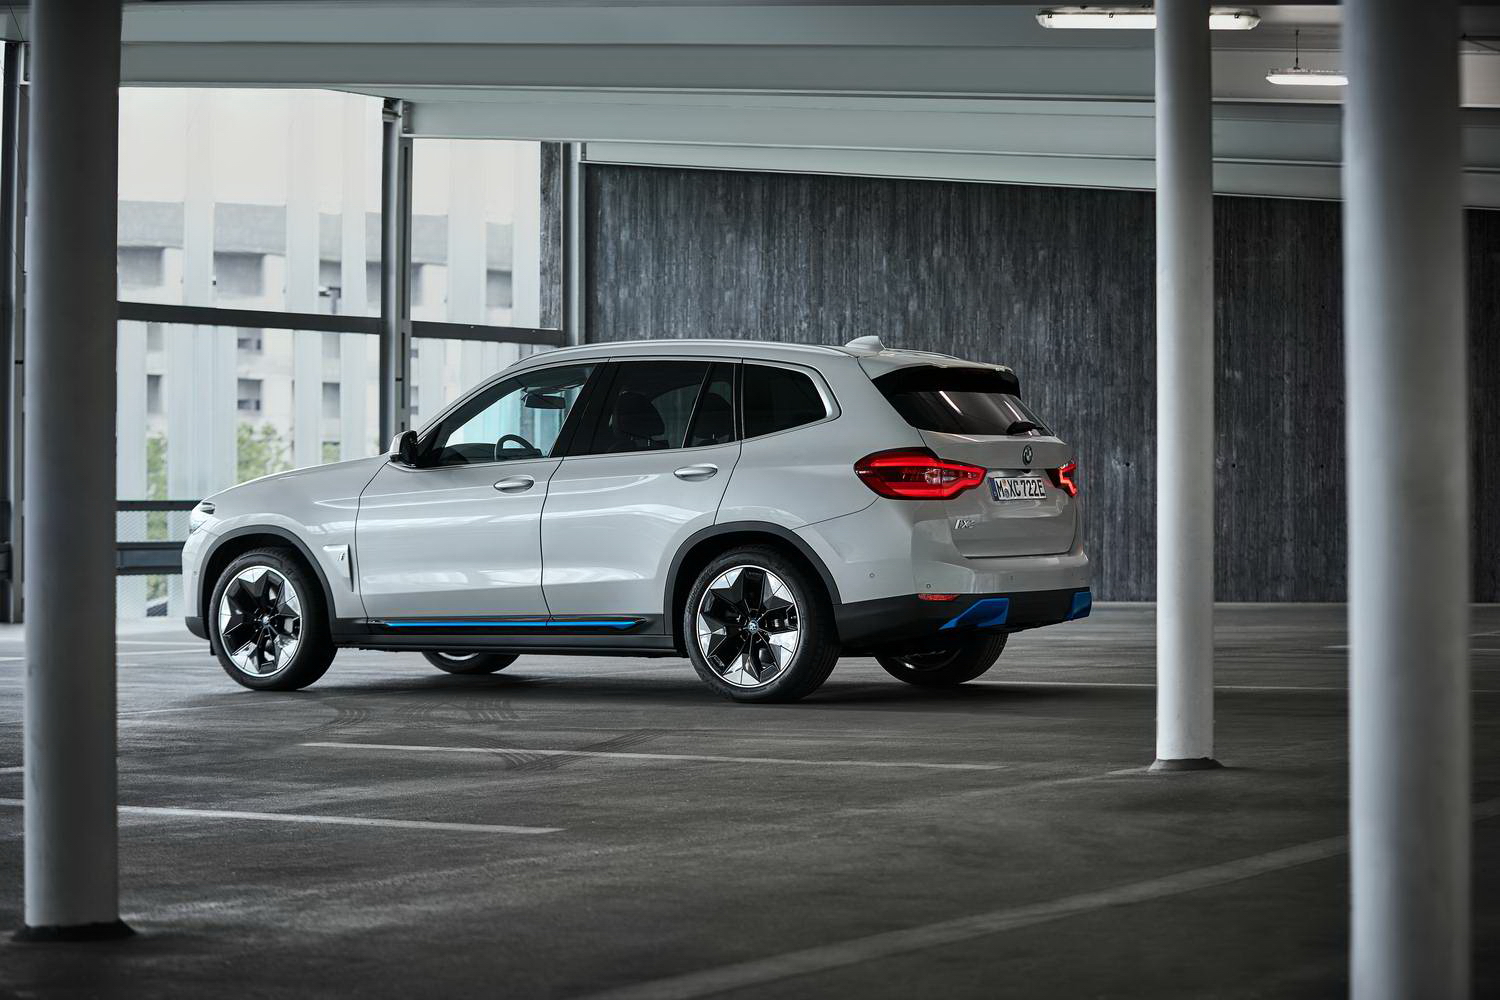 Electric BMW iX3 SUV unveiled in full